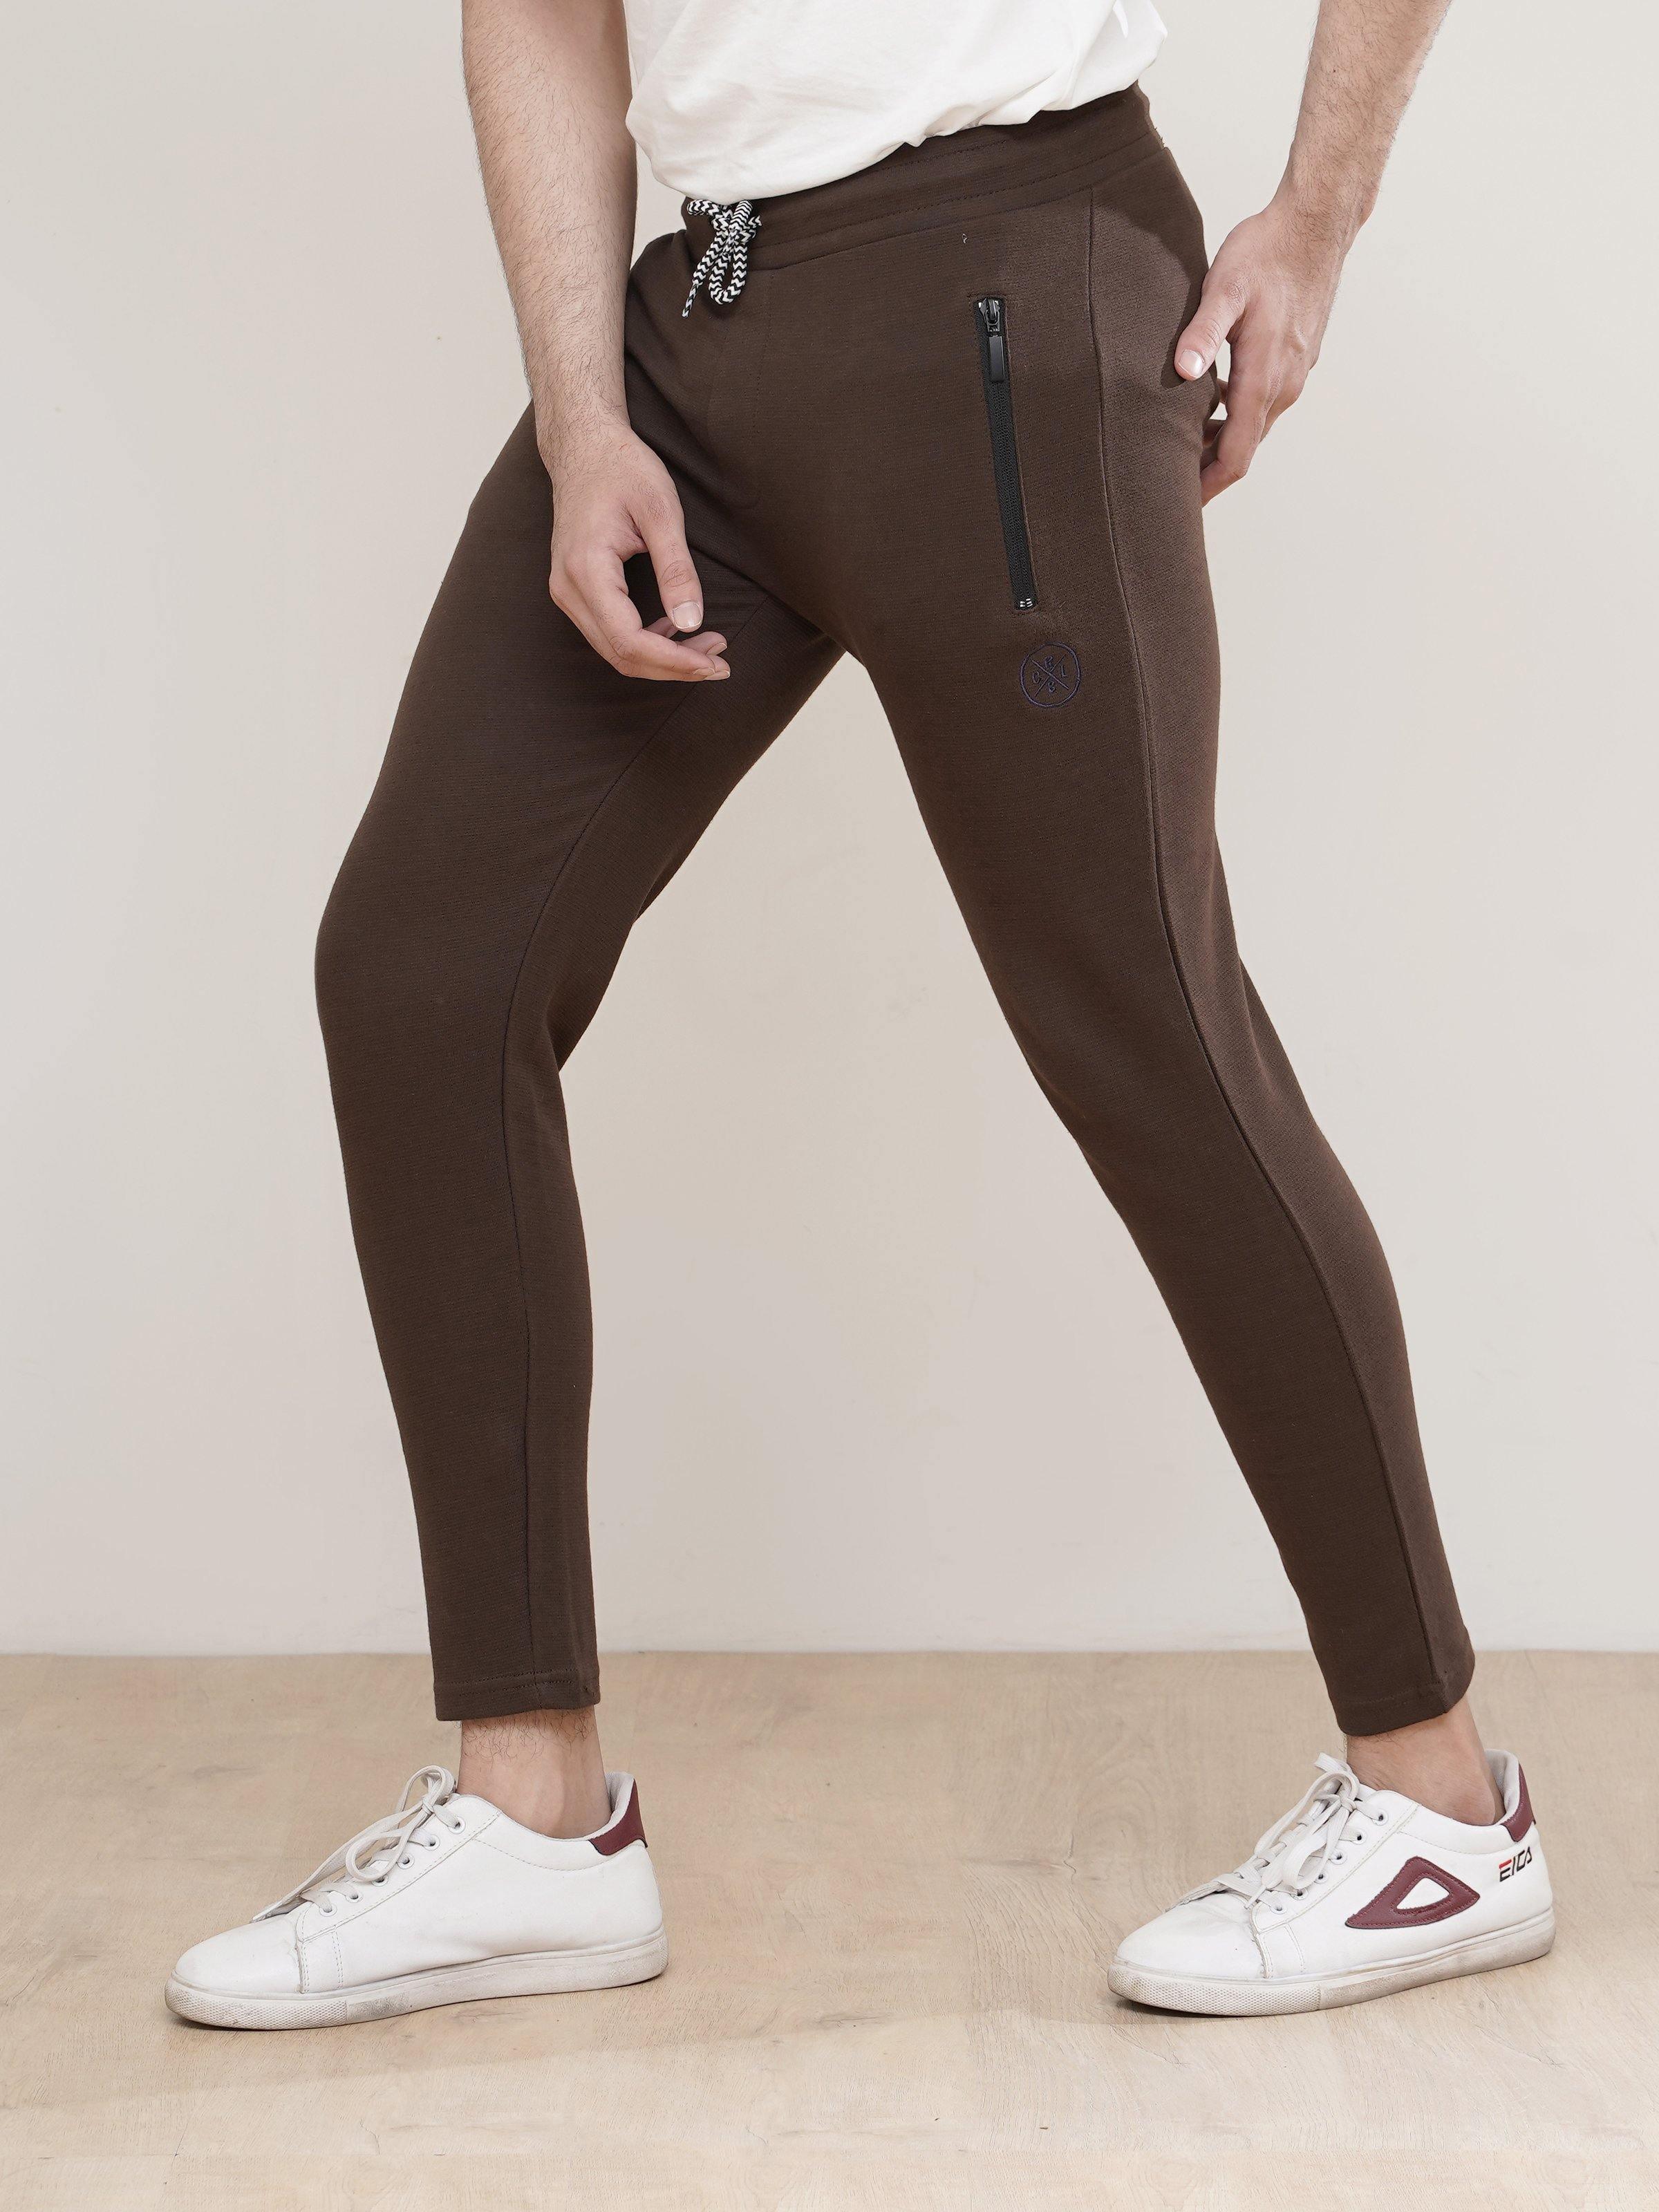 OTTOMAN JOGGER TROUSER DARK BROWN at Charcoal Clothing